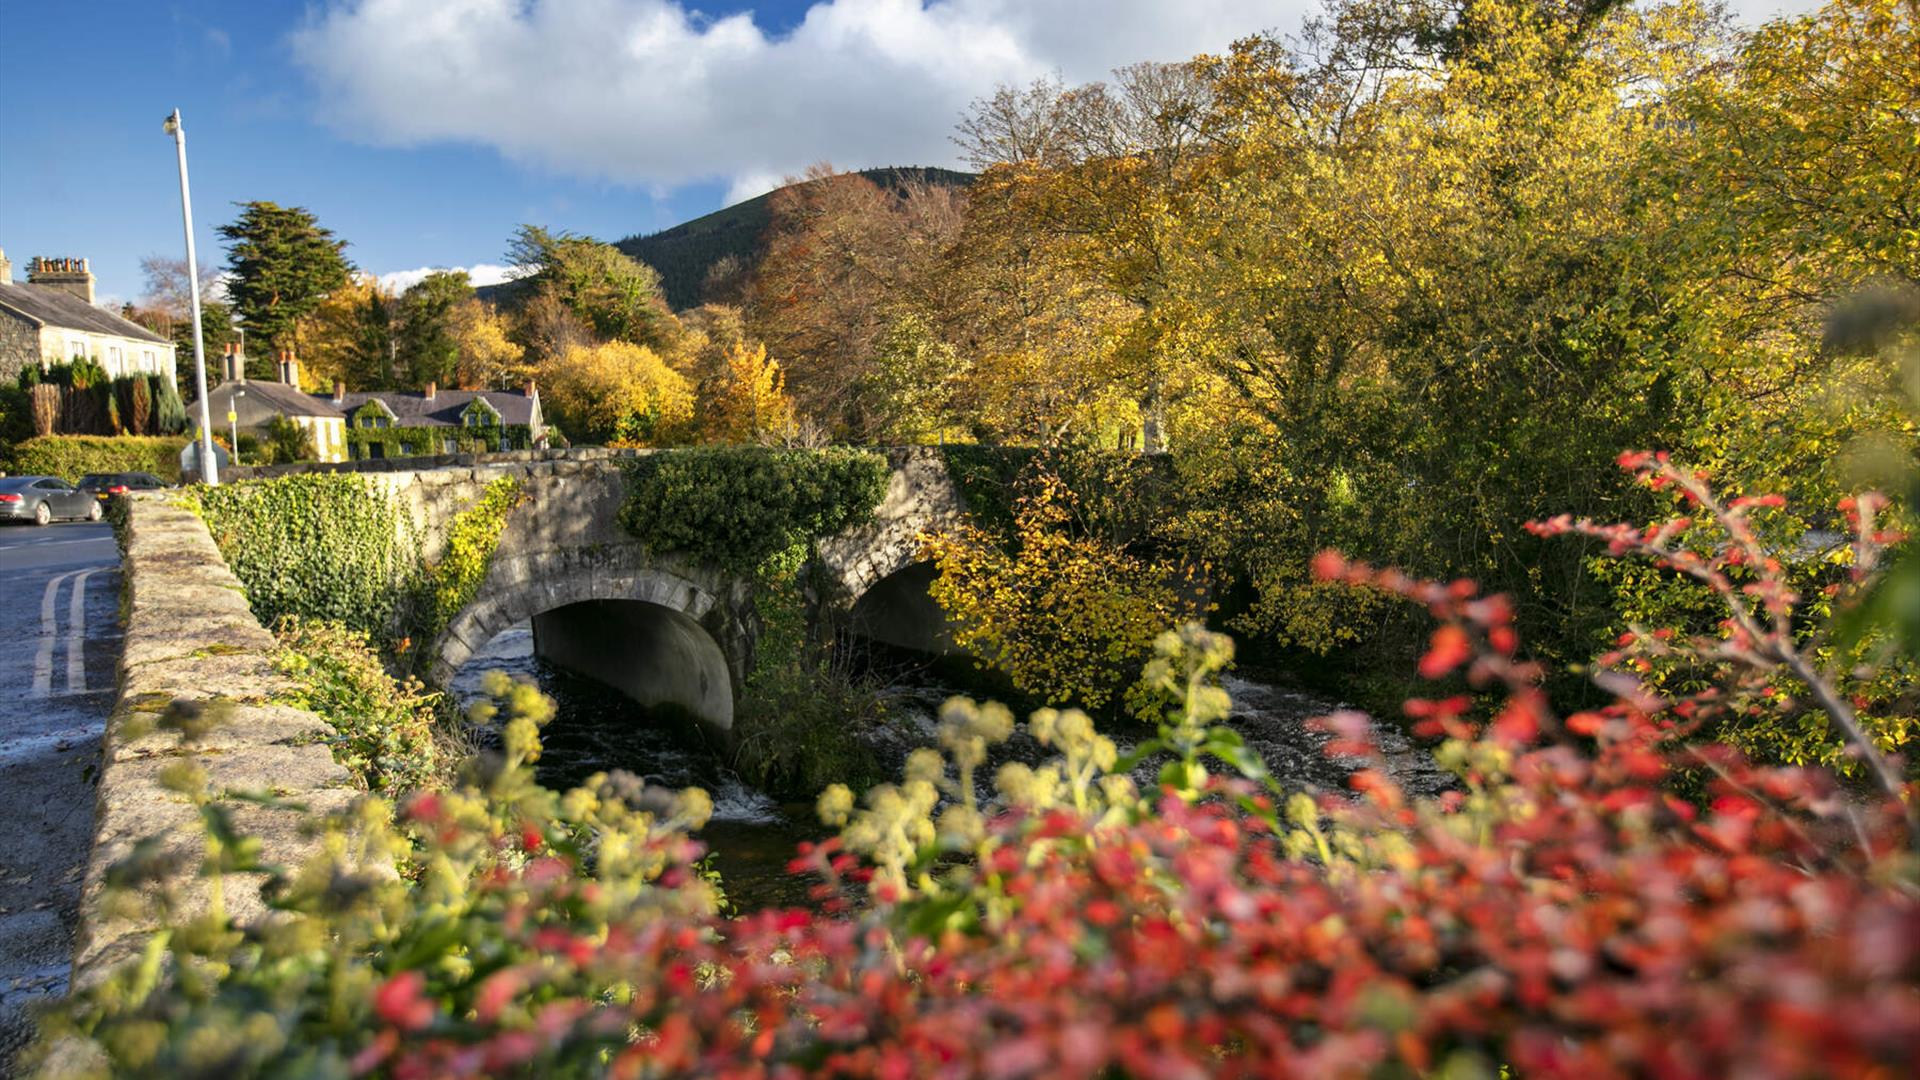 The colours of autumn create a picturesque scene in Rostrevor, County Down